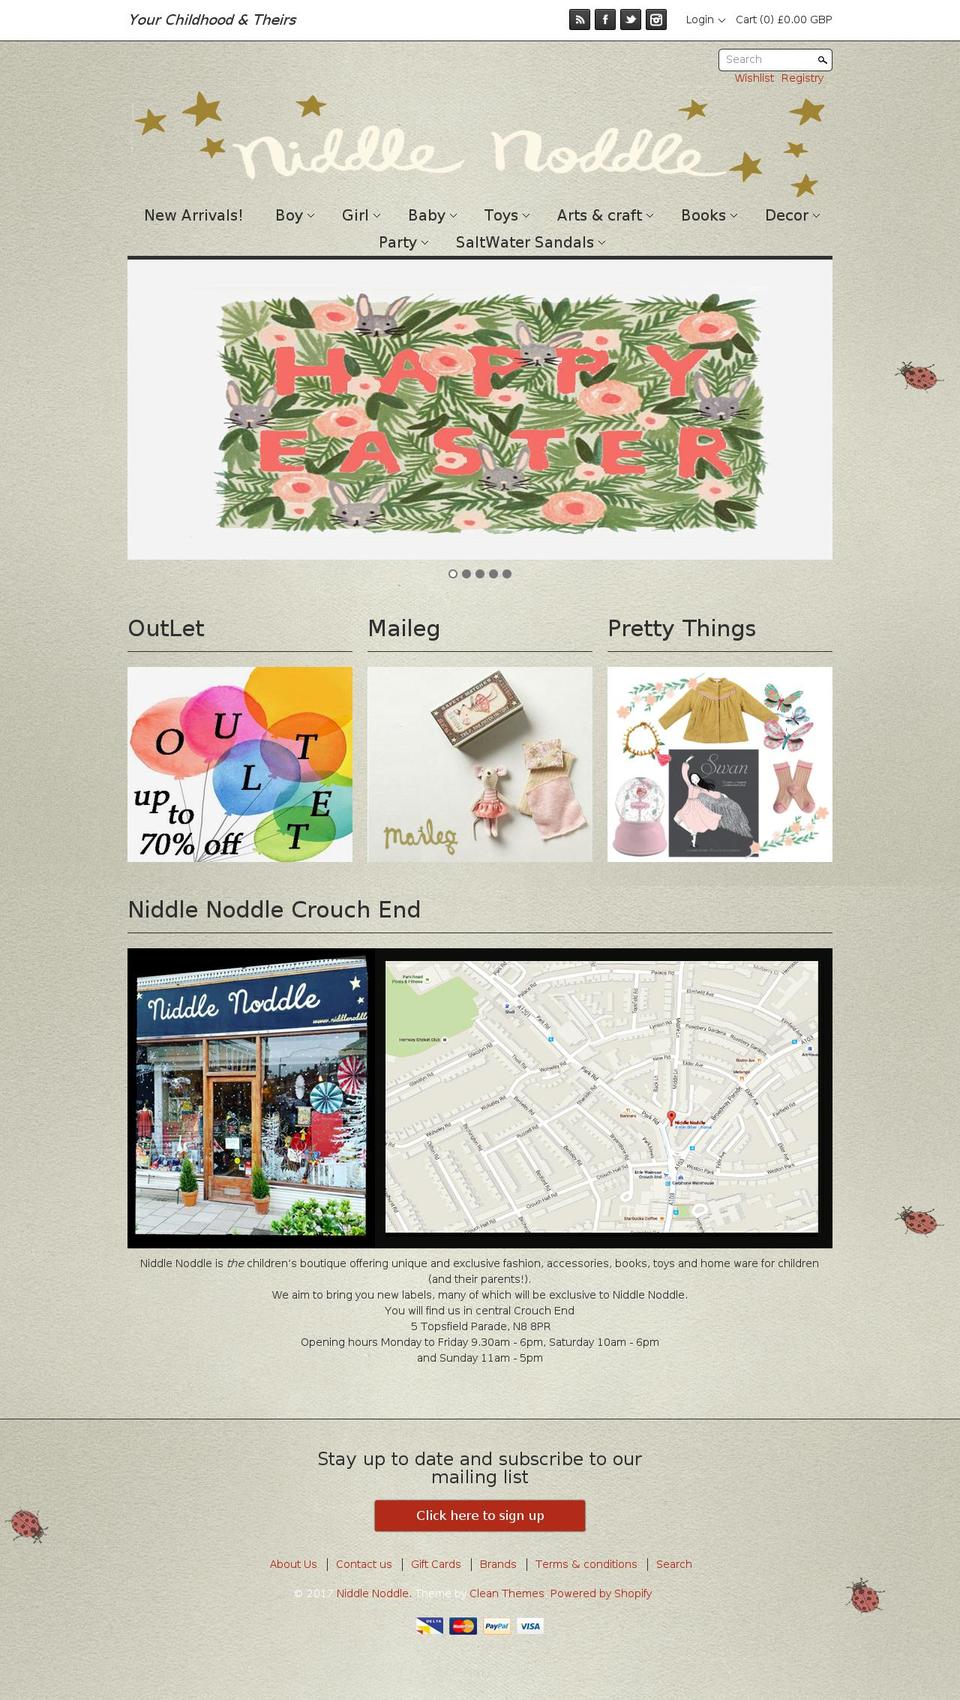 Canopy Shopify theme site example niddlenoddle.com